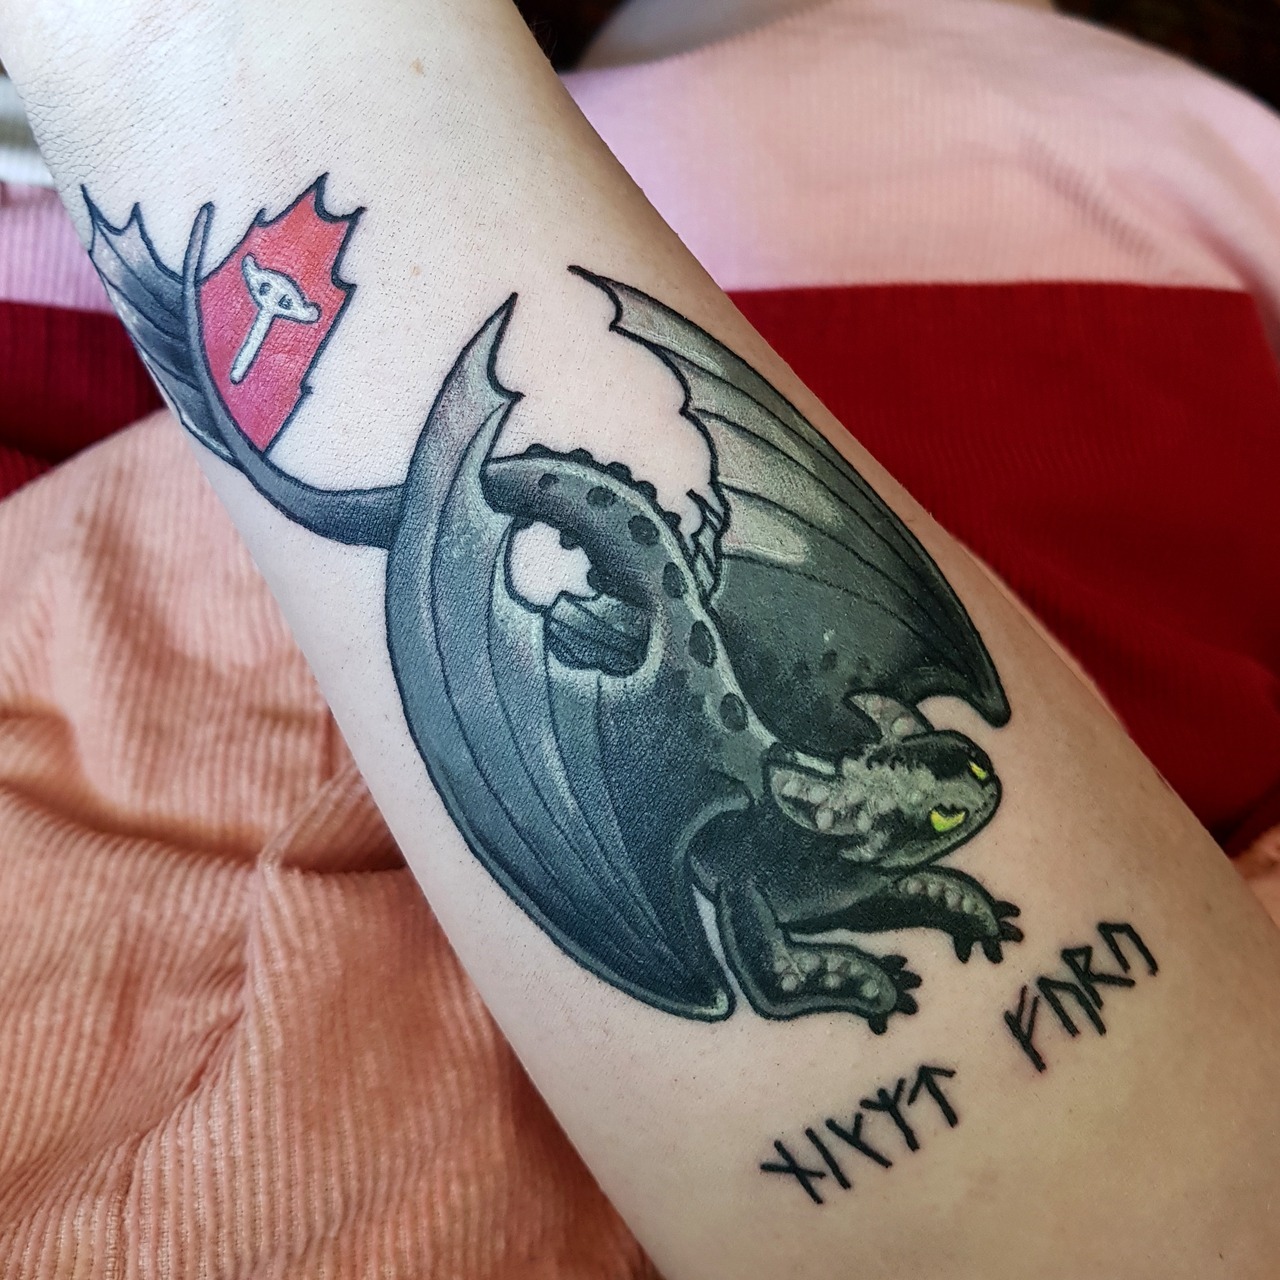 How to train your dragon tattoo ideas. 